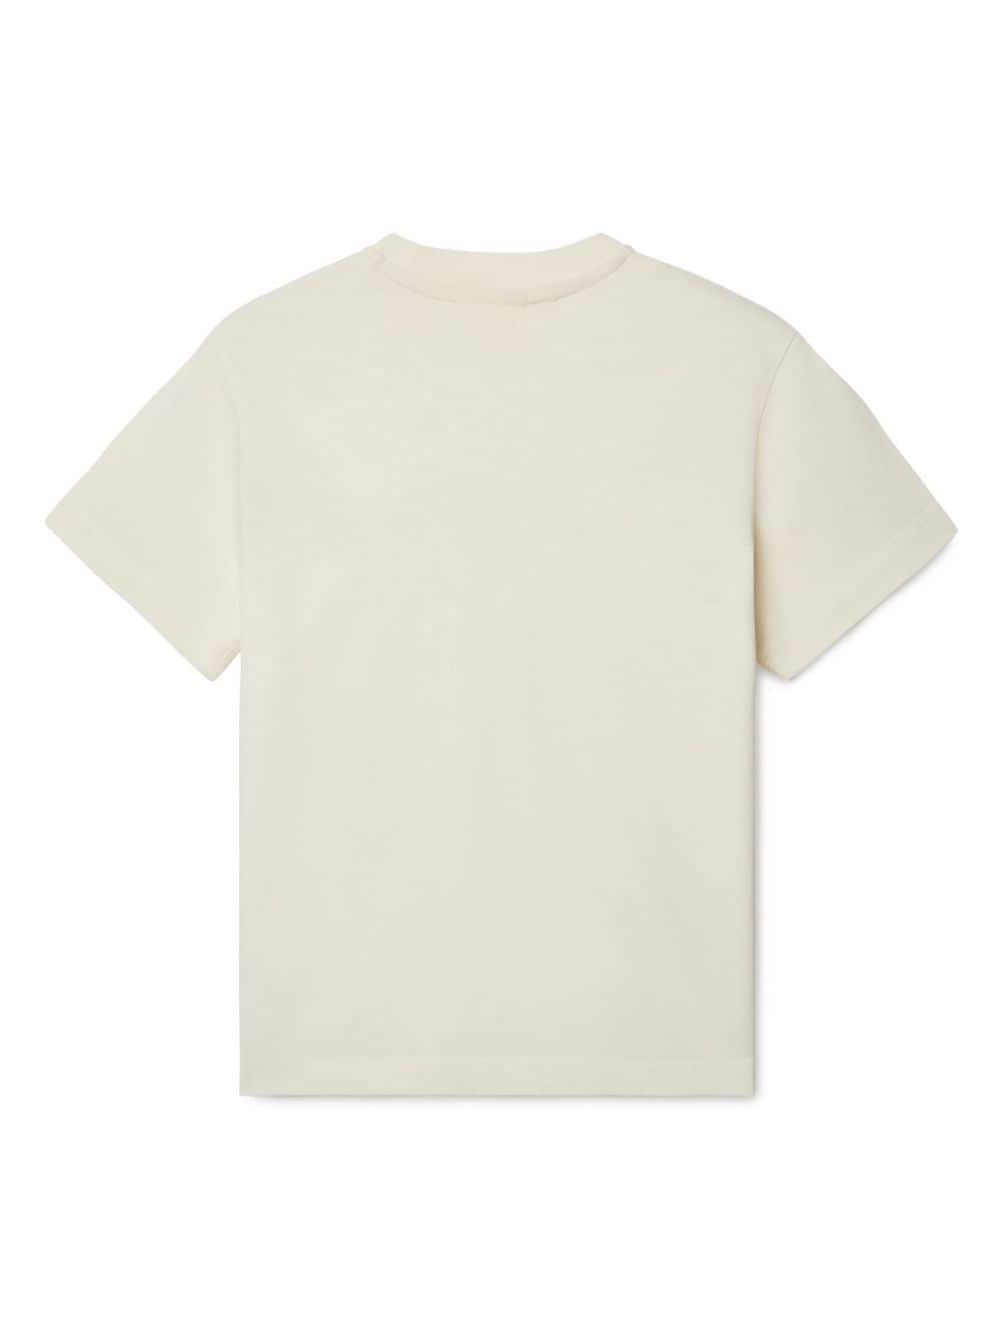 Off-white cotton t-shirt for boys